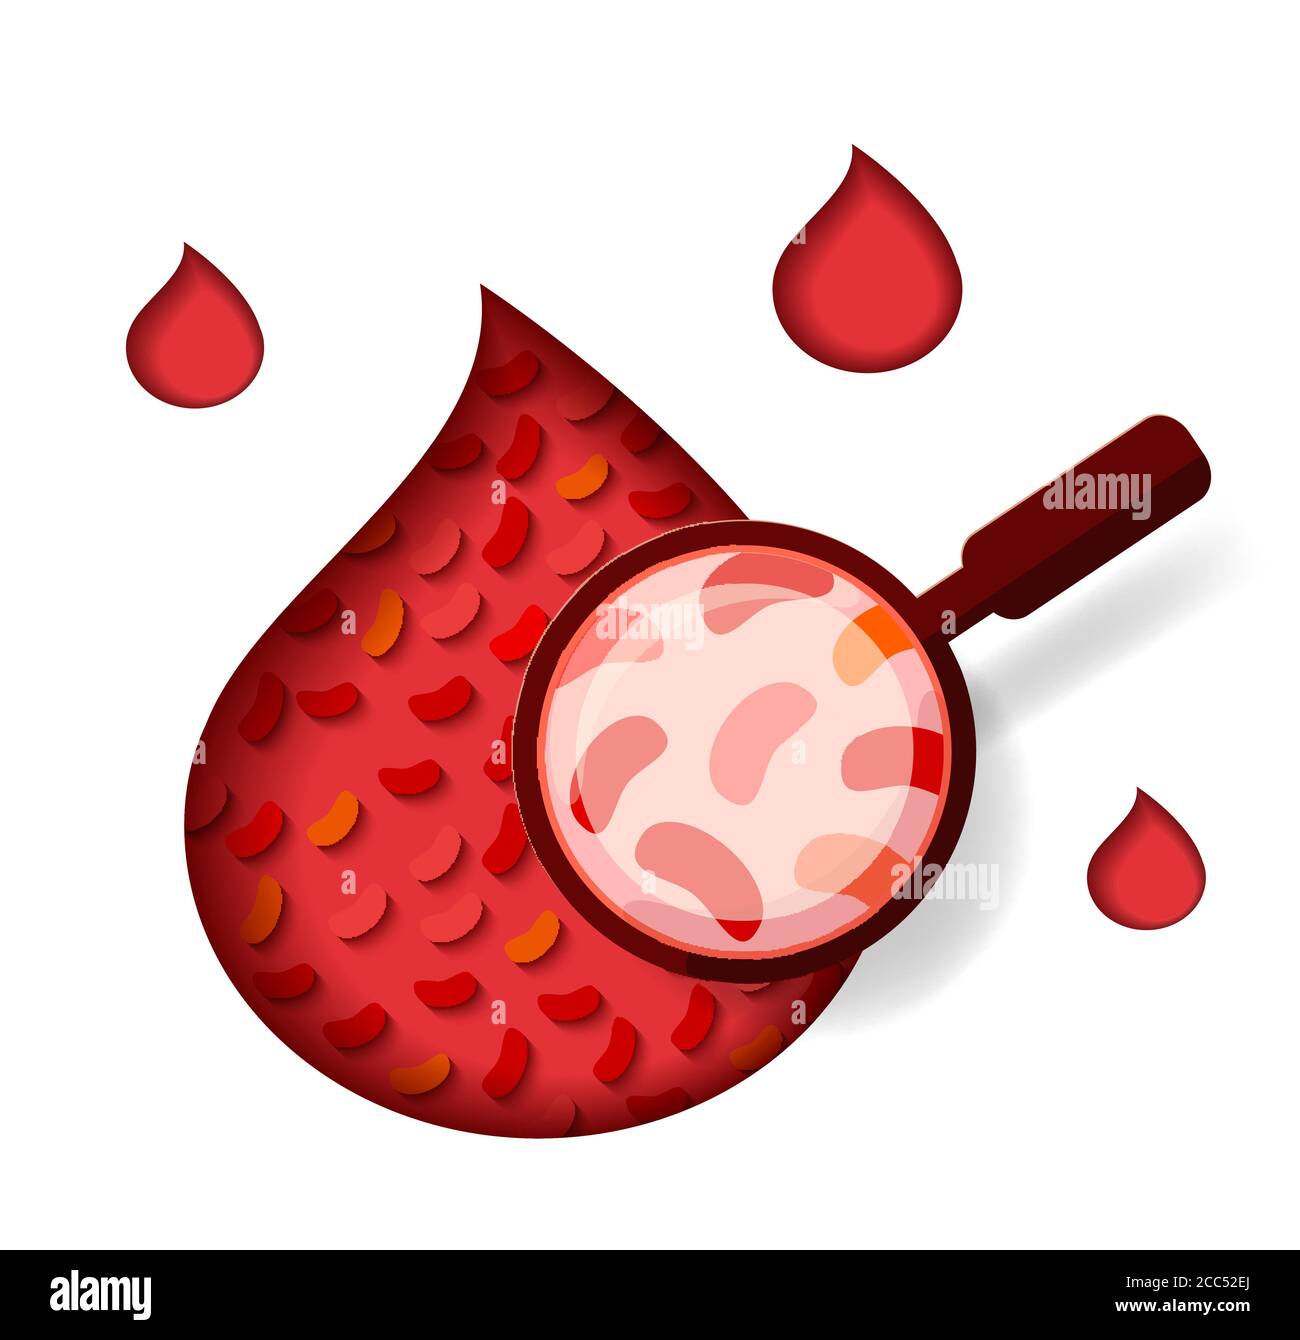 Drop of blood with red blood cells and a magnifying glass. Medical blood test. Vector illustrations, paper art and digital crafts style. Isolated on white background. Stock Vector